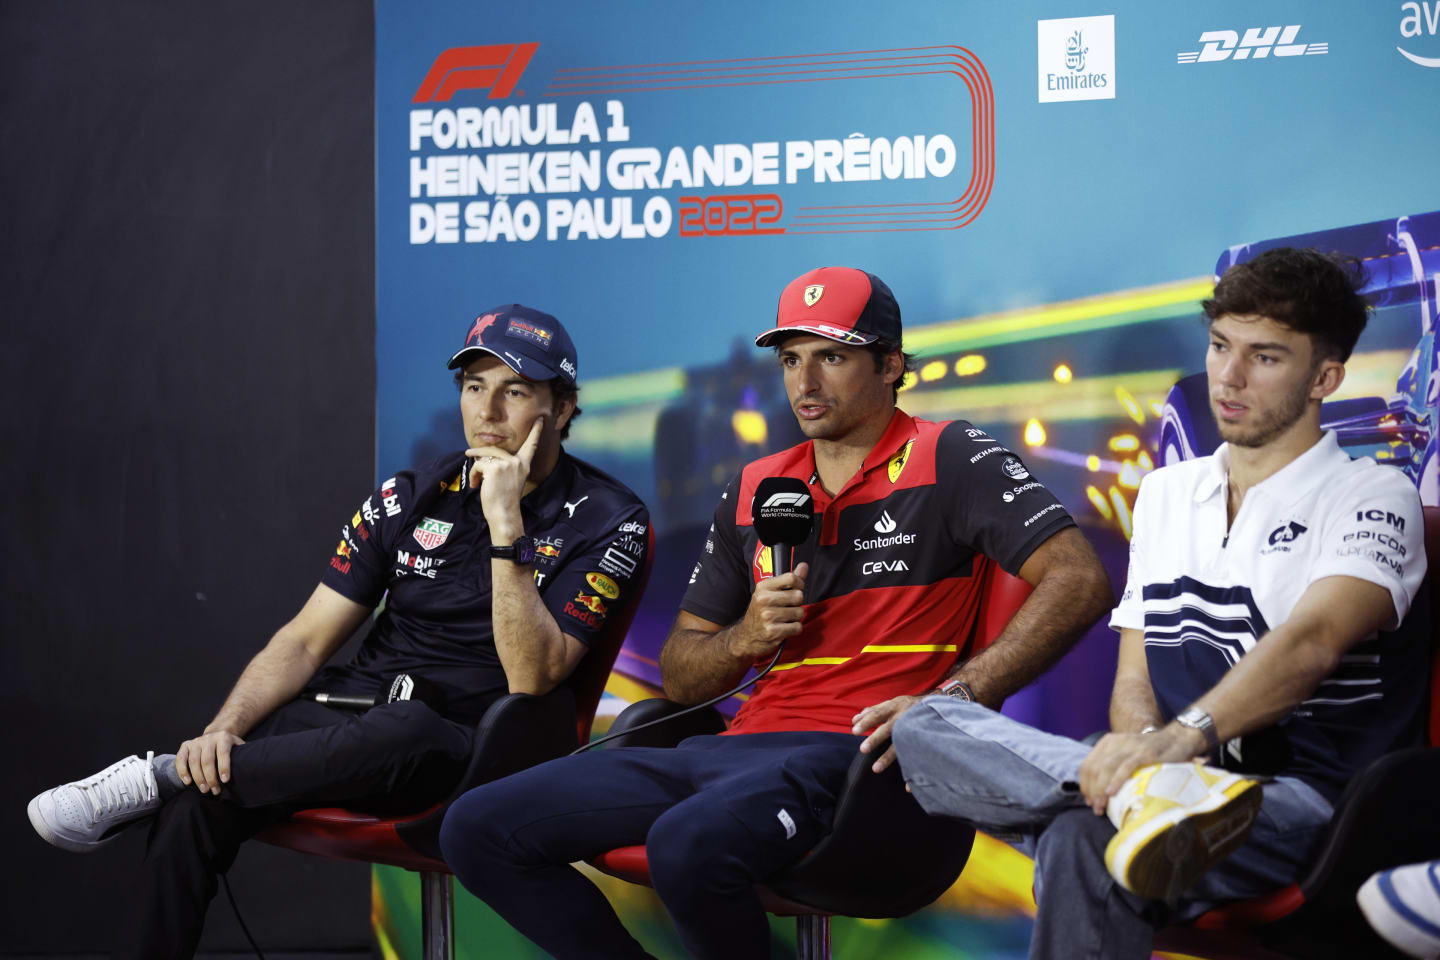 SAO PAULO, BRAZIL - NOVEMBER 10: Sergio Perez of Mexico and Oracle Red Bull Racing, Carlos Sainz of Spain and Ferrari and Pierre Gasly of France and Scuderia AlphaTauri attend the Drivers Press Conference during previews ahead of the F1 Grand Prix of Brazil at Autodromo Jose Carlos Pace on November 10, 2022 in Sao Paulo, Brazil. (Photo by Jared C. Tilton/Getty Images)